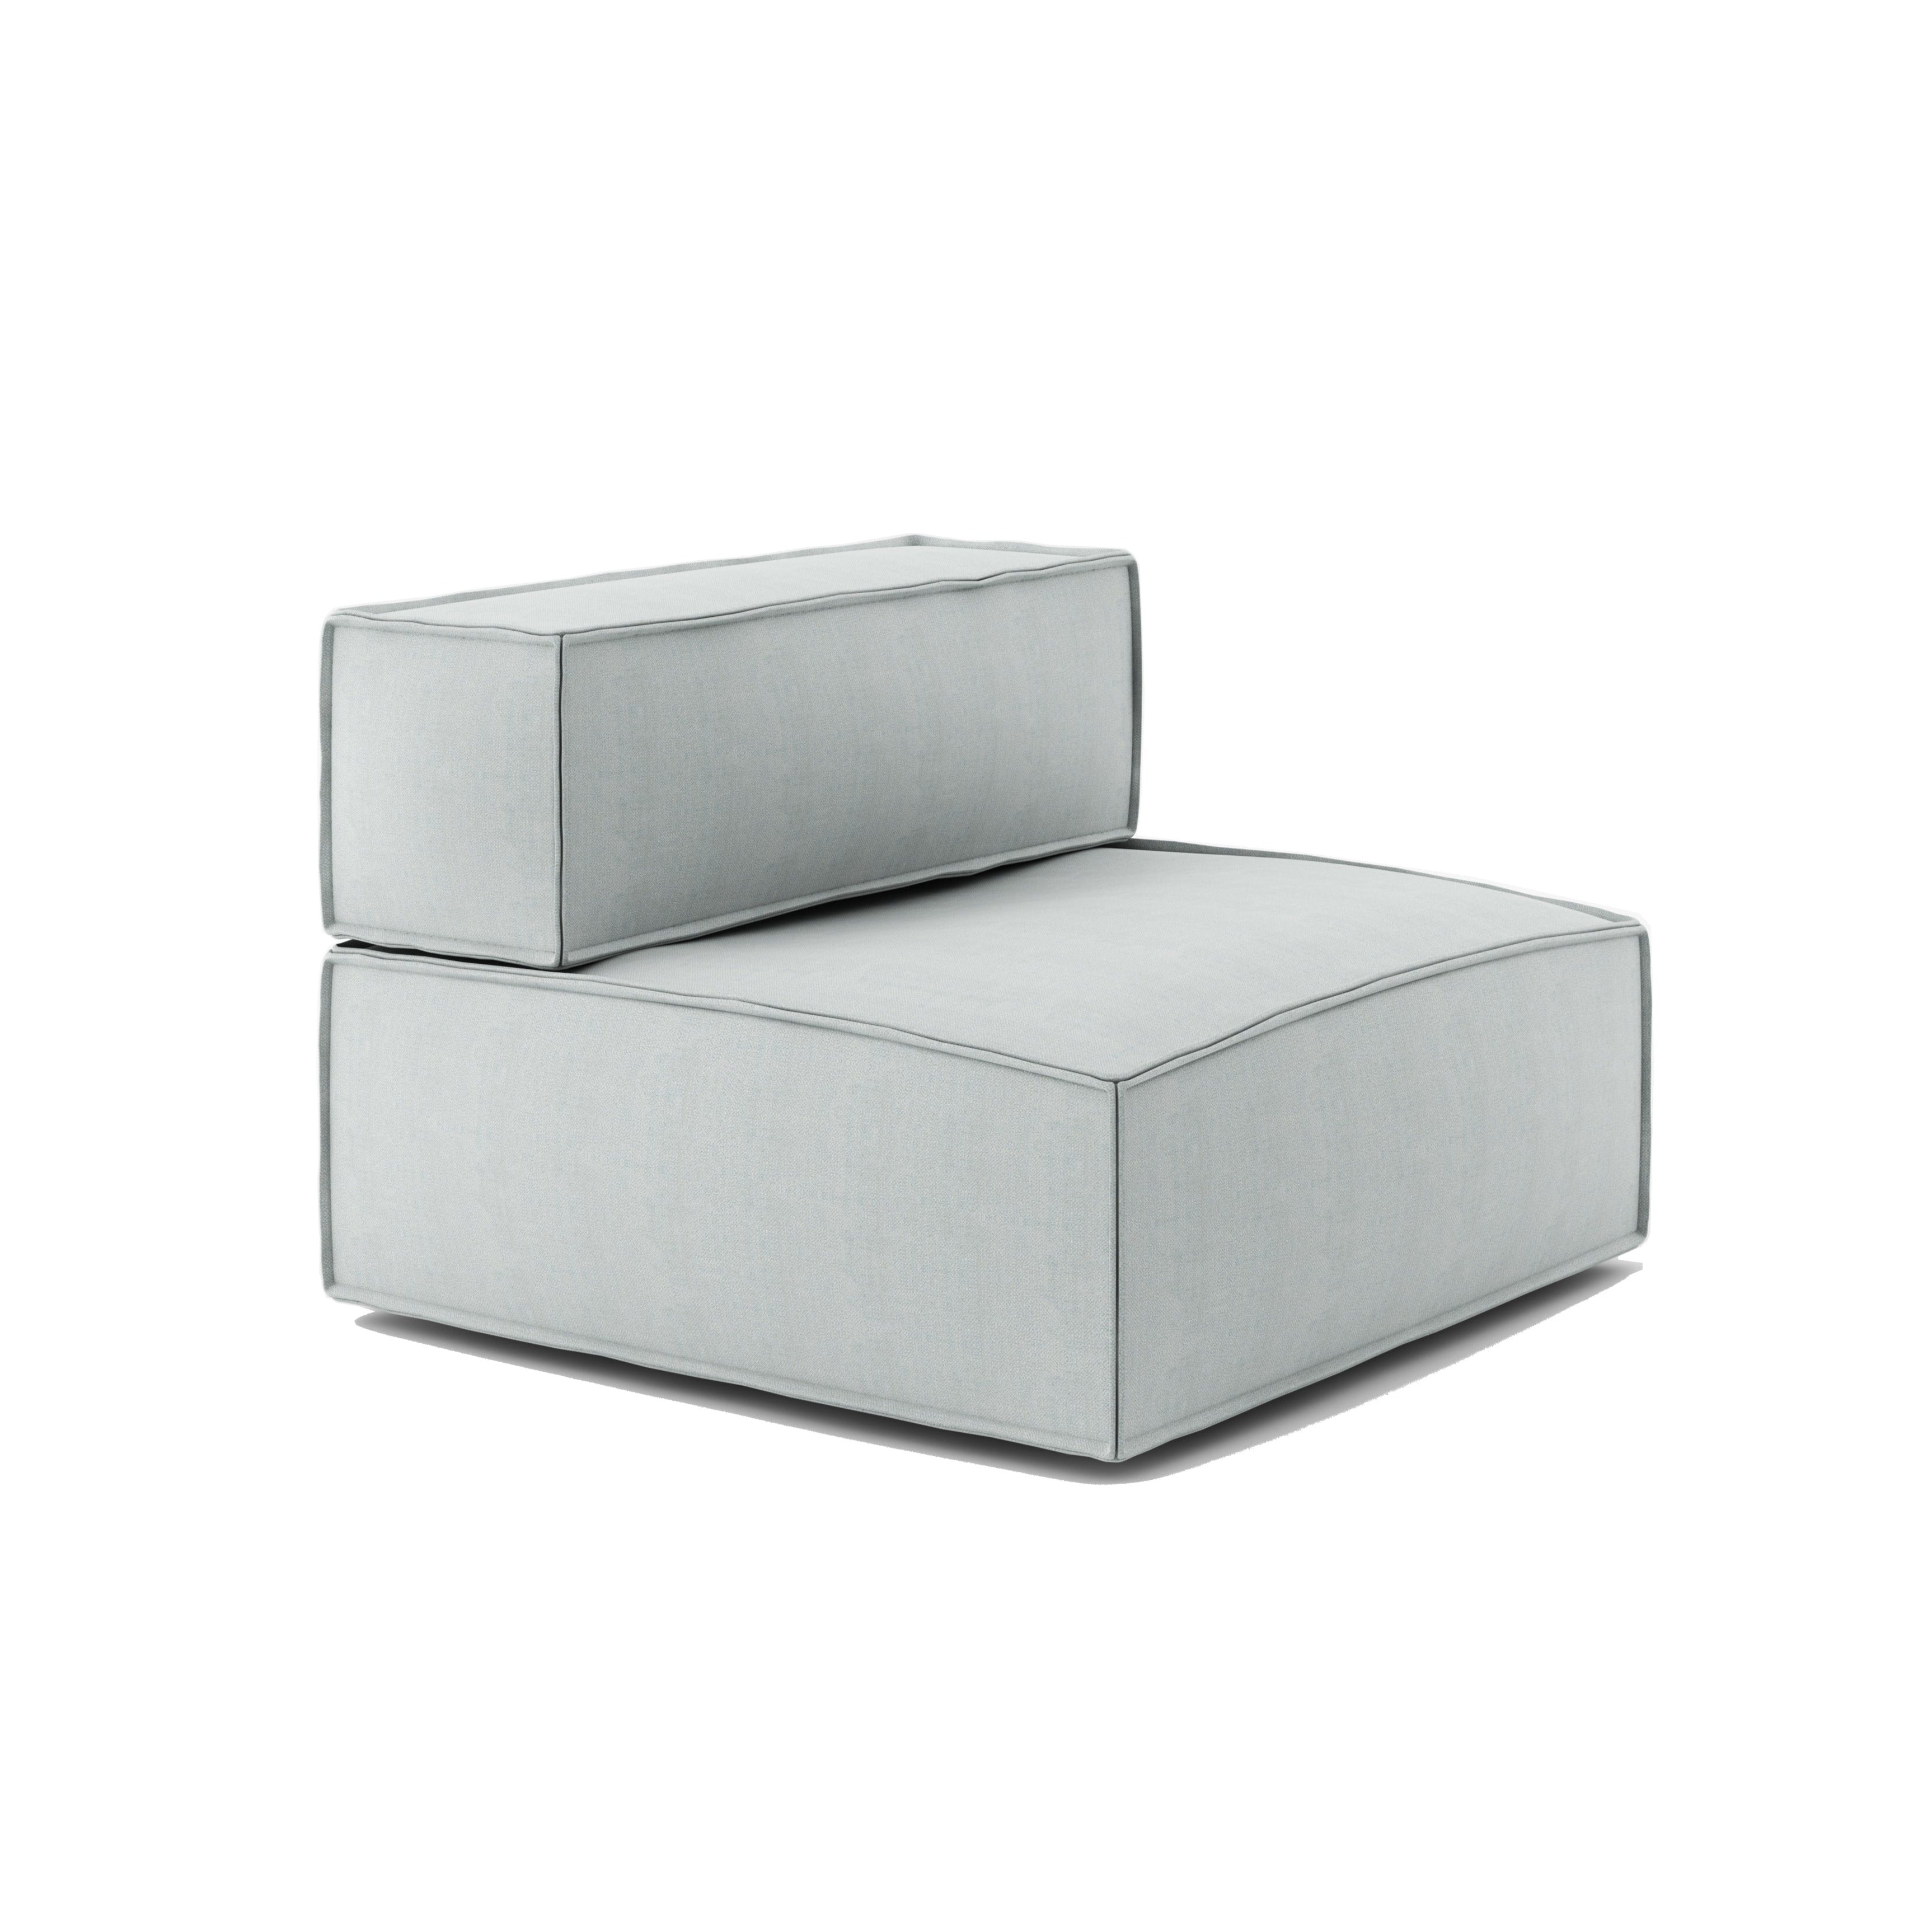 NOI armchair with one side, Absynth, Eye on Design